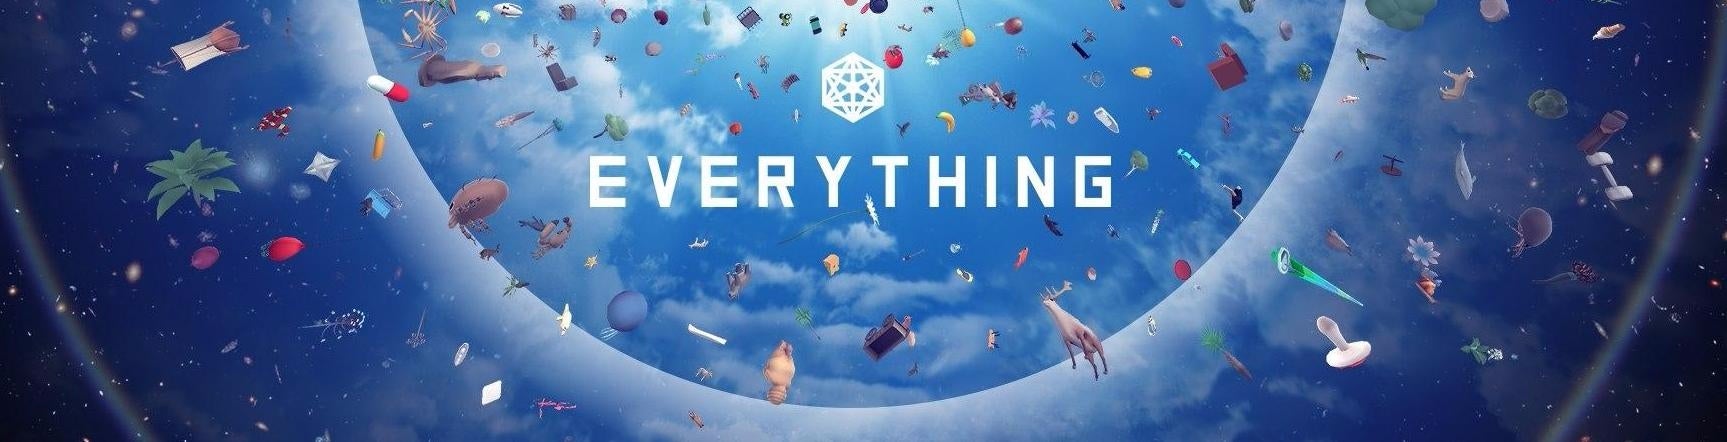 Image for Everything is the most ambitious catalogue of things ever committed to a video game